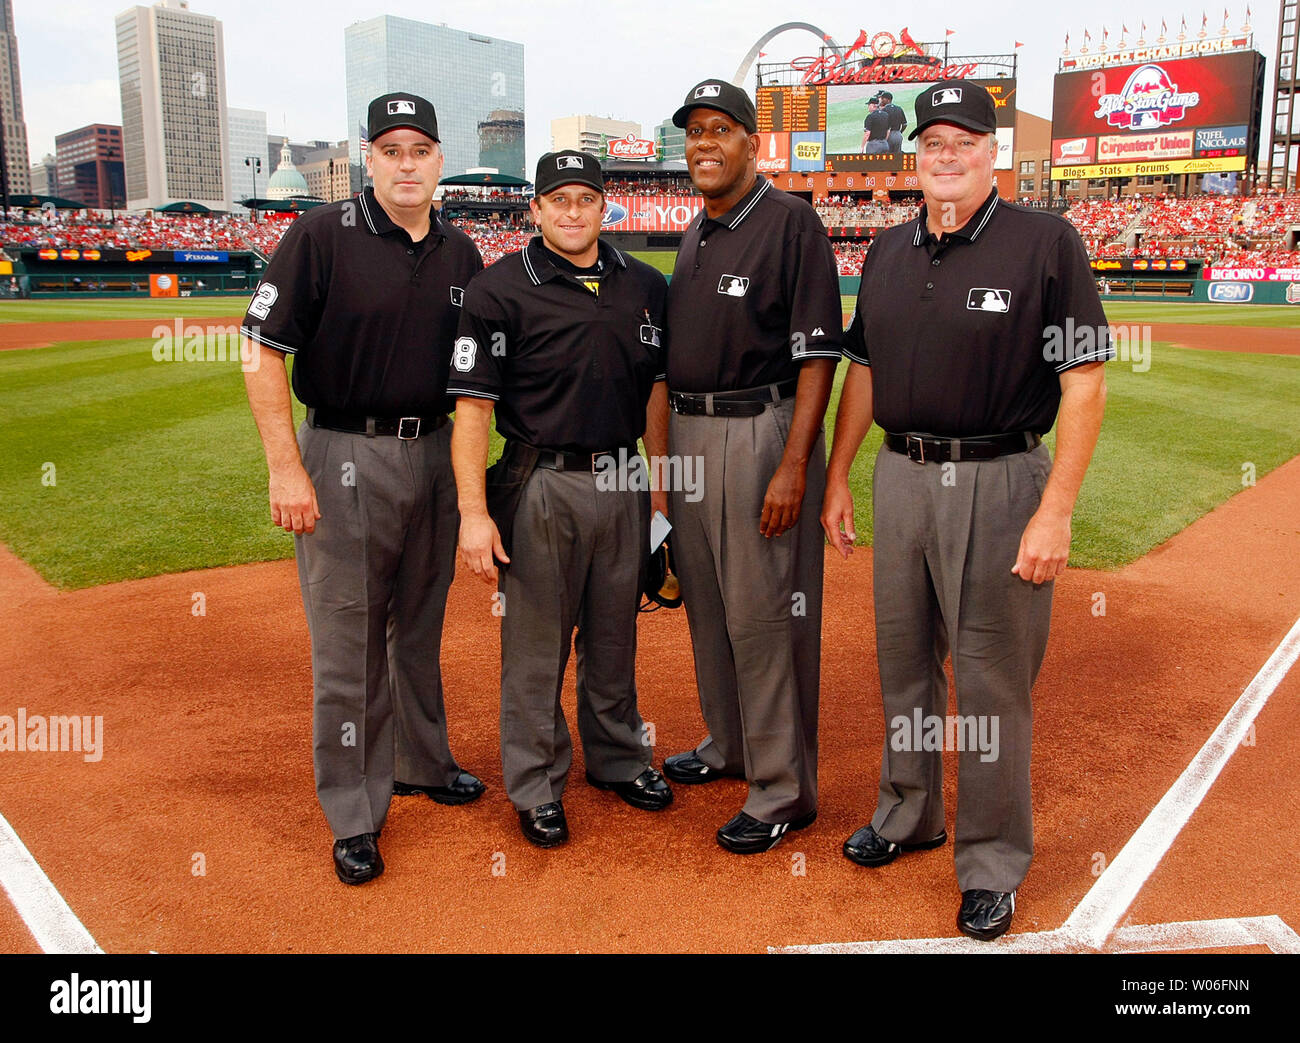 Major League umpires (L to R) Bill Welke, Chris Guccione, Chuck Meriwether and Tim Welke pose for a photograph before the Los Angeles Dodgers and the St. Louis Cardinals baseball game at Busch Stadium in St. Louis on August 6, 2008. (UPI Photo/Bill Greenblatt) Stock Photo